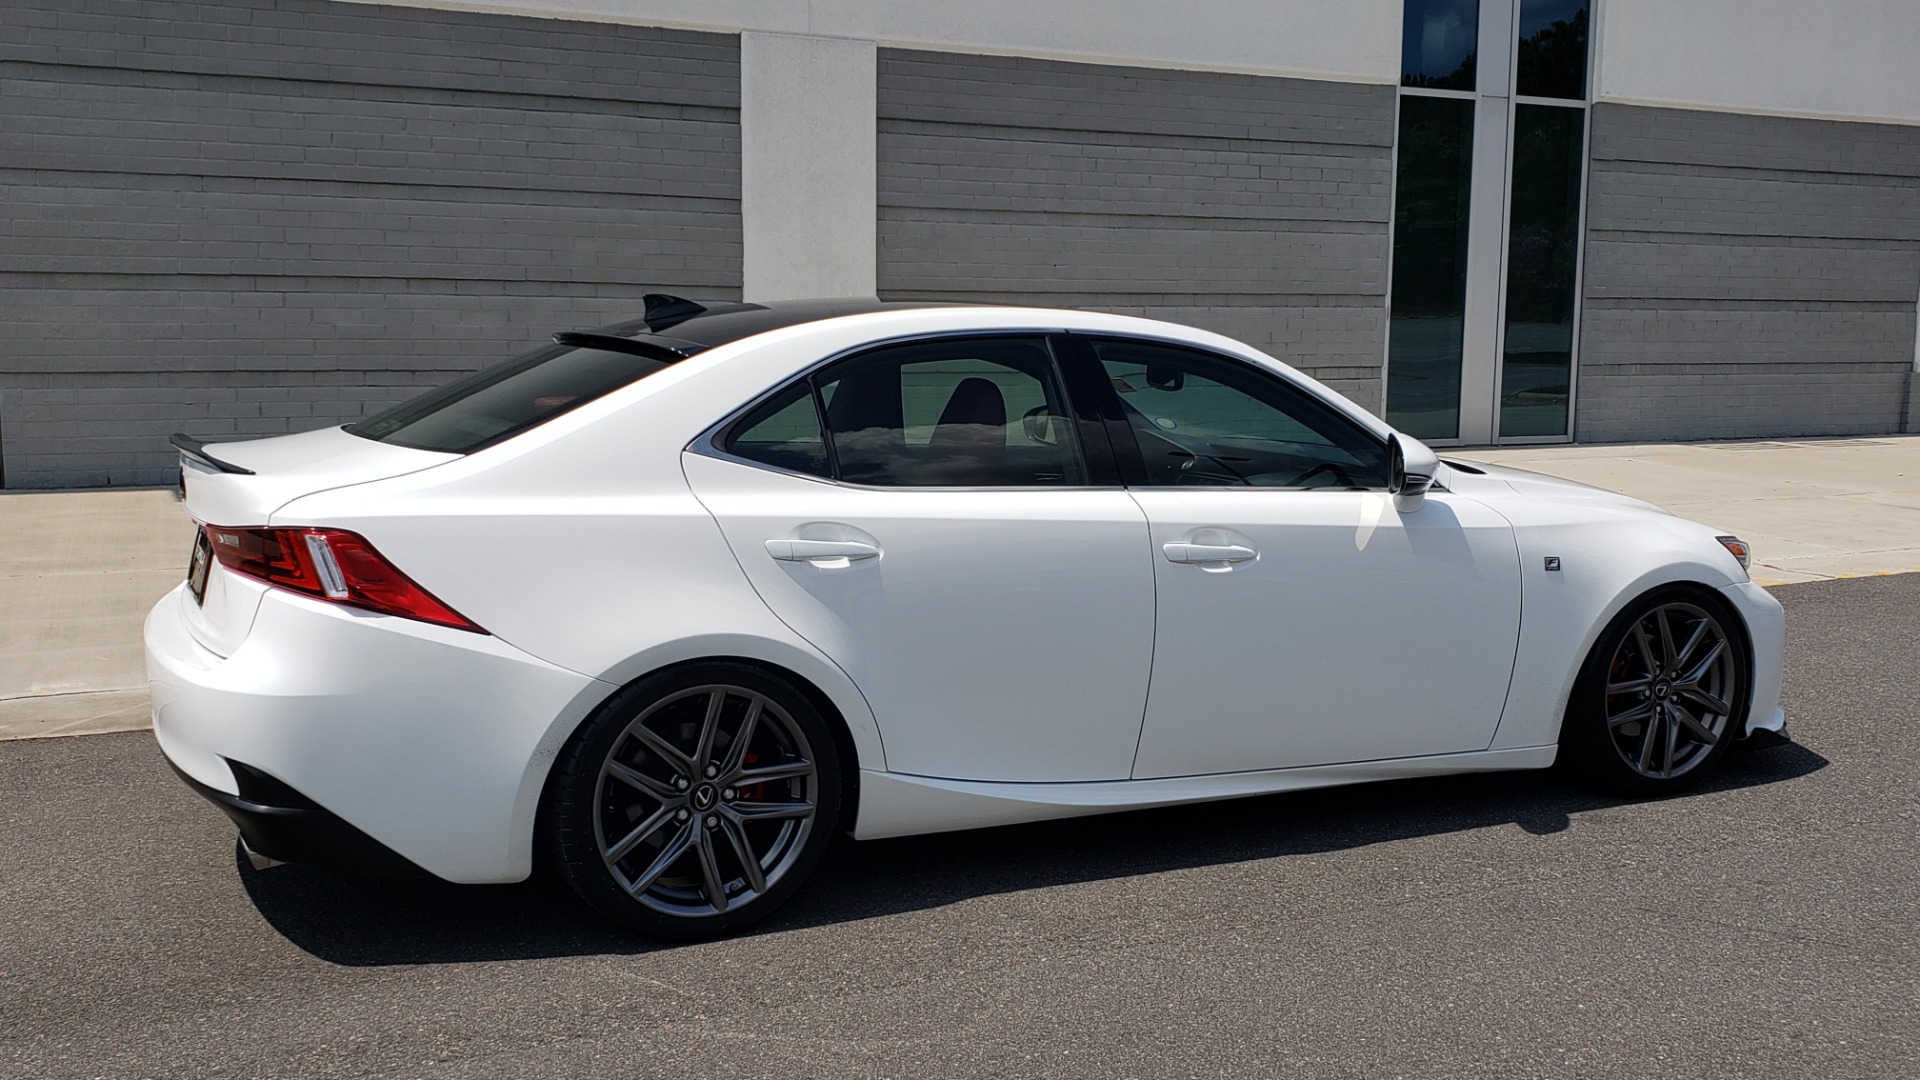 Used 2014 Lexus IS 250 F-SPORT SEDAN / BLIND SPOT MONITOR / REARVIEW / 18IN WHEELS for sale Sold at Formula Imports in Charlotte NC 28227 9